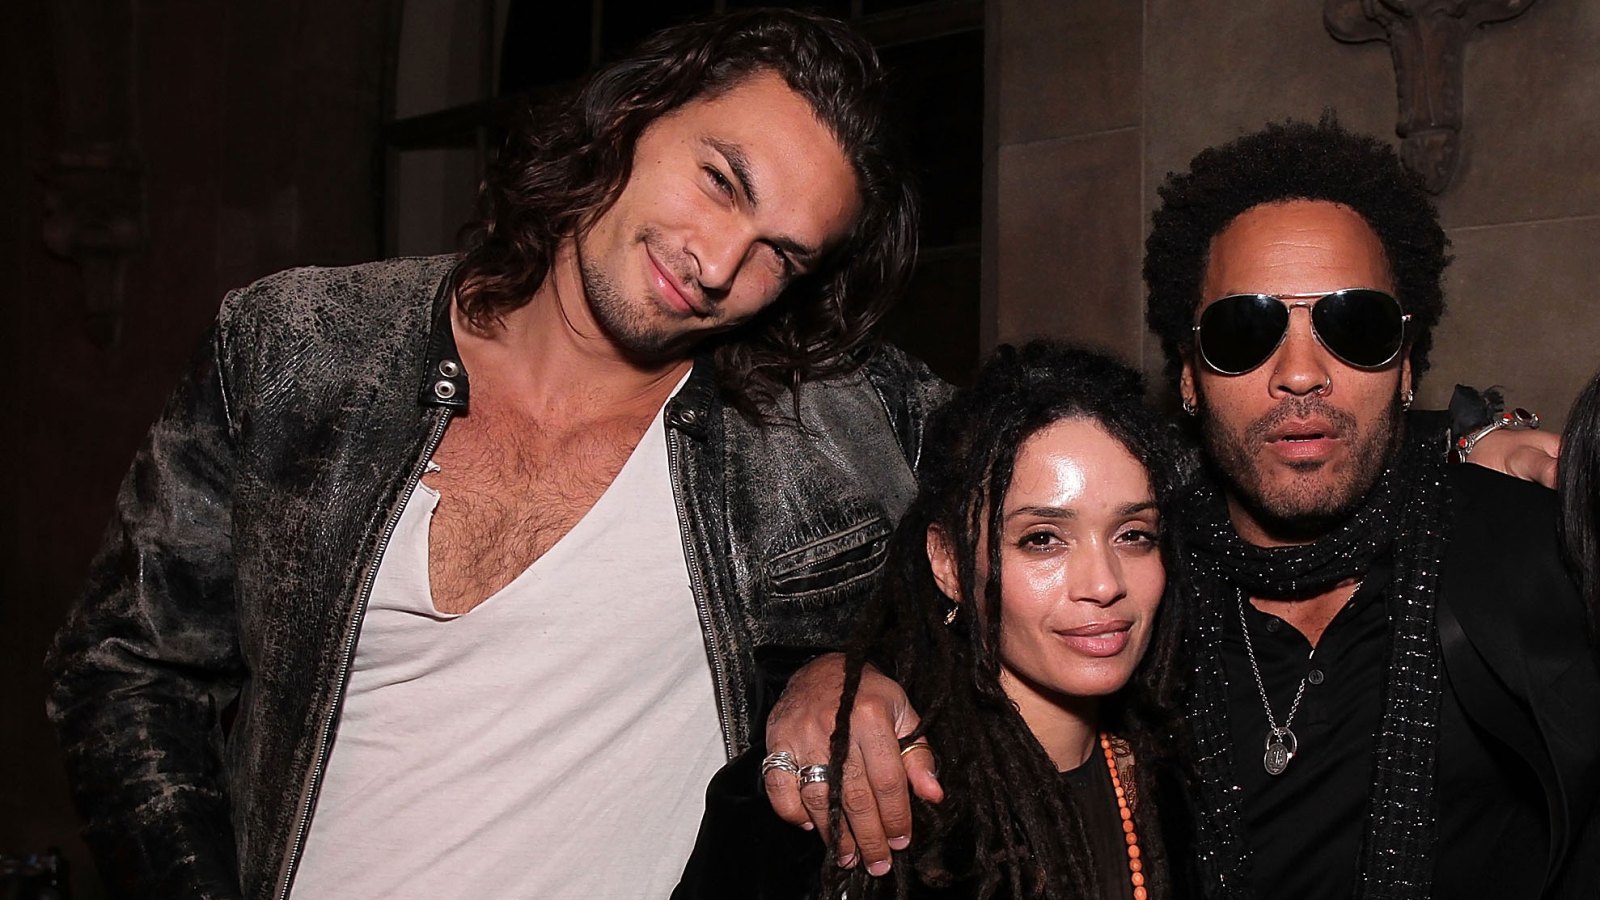 Lenny Kravitz Opens Up About His Relationship With His Ex-Wife Lisa Bonet’s Husband Jason Momoa